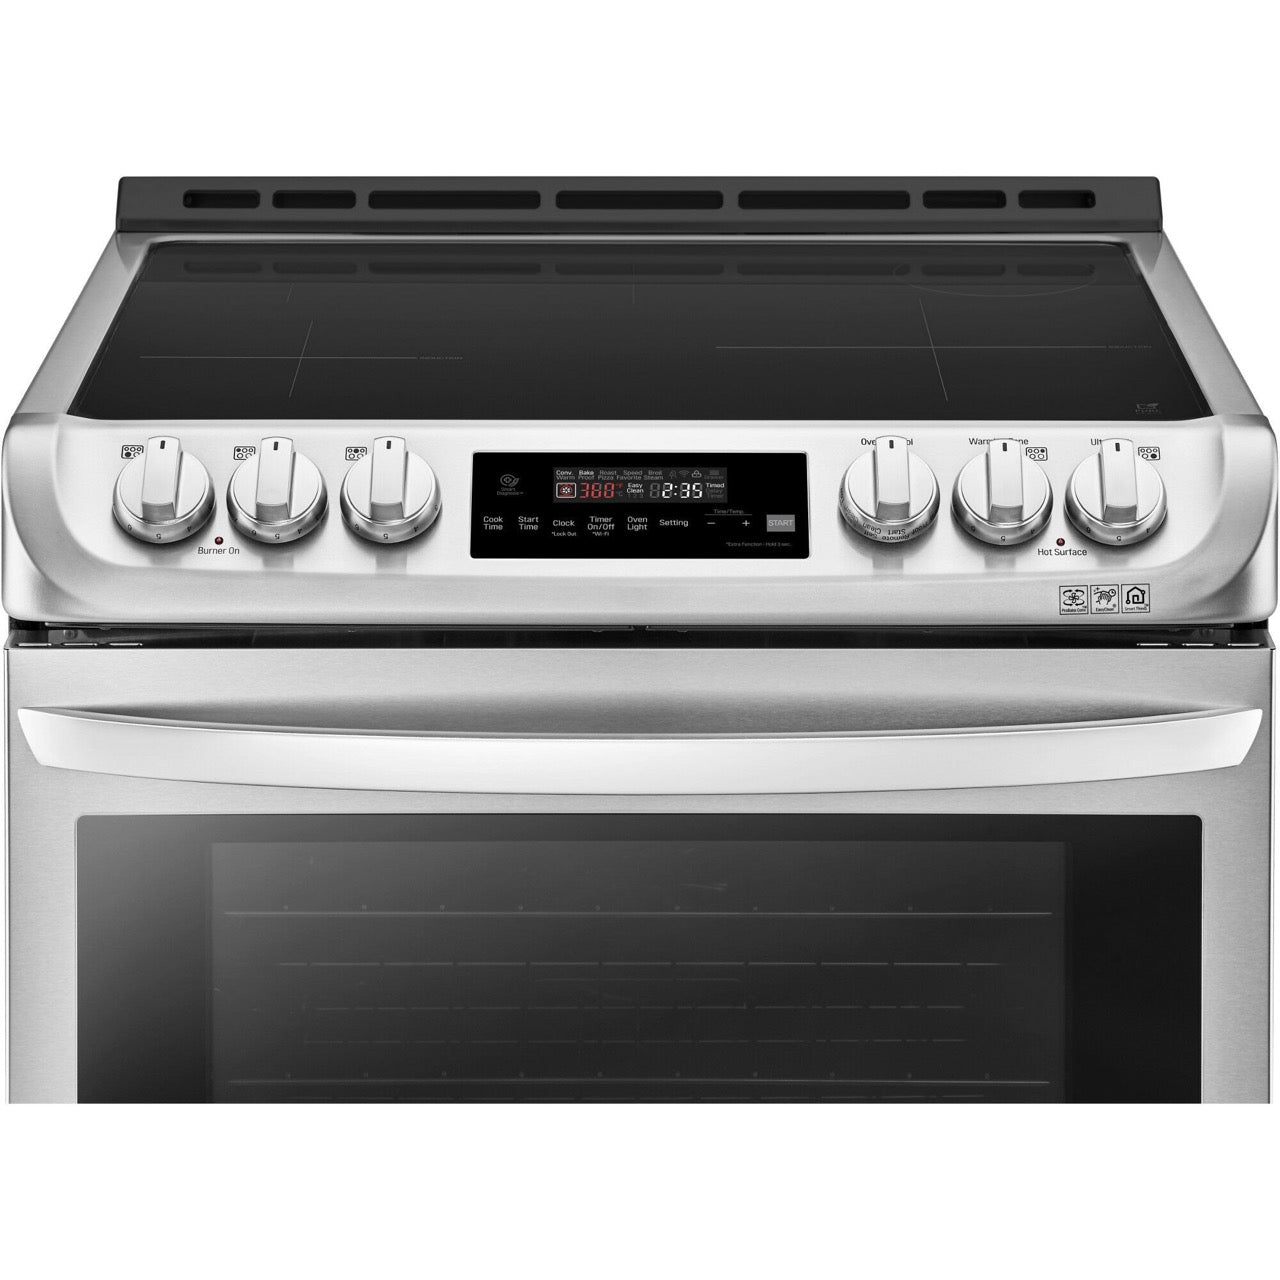 LG Electronics 6.3-Cu. Ft. Slide-In Electric Smart Range with ProBake Convection and Induction, Stainless Steel (LSE4616ST)